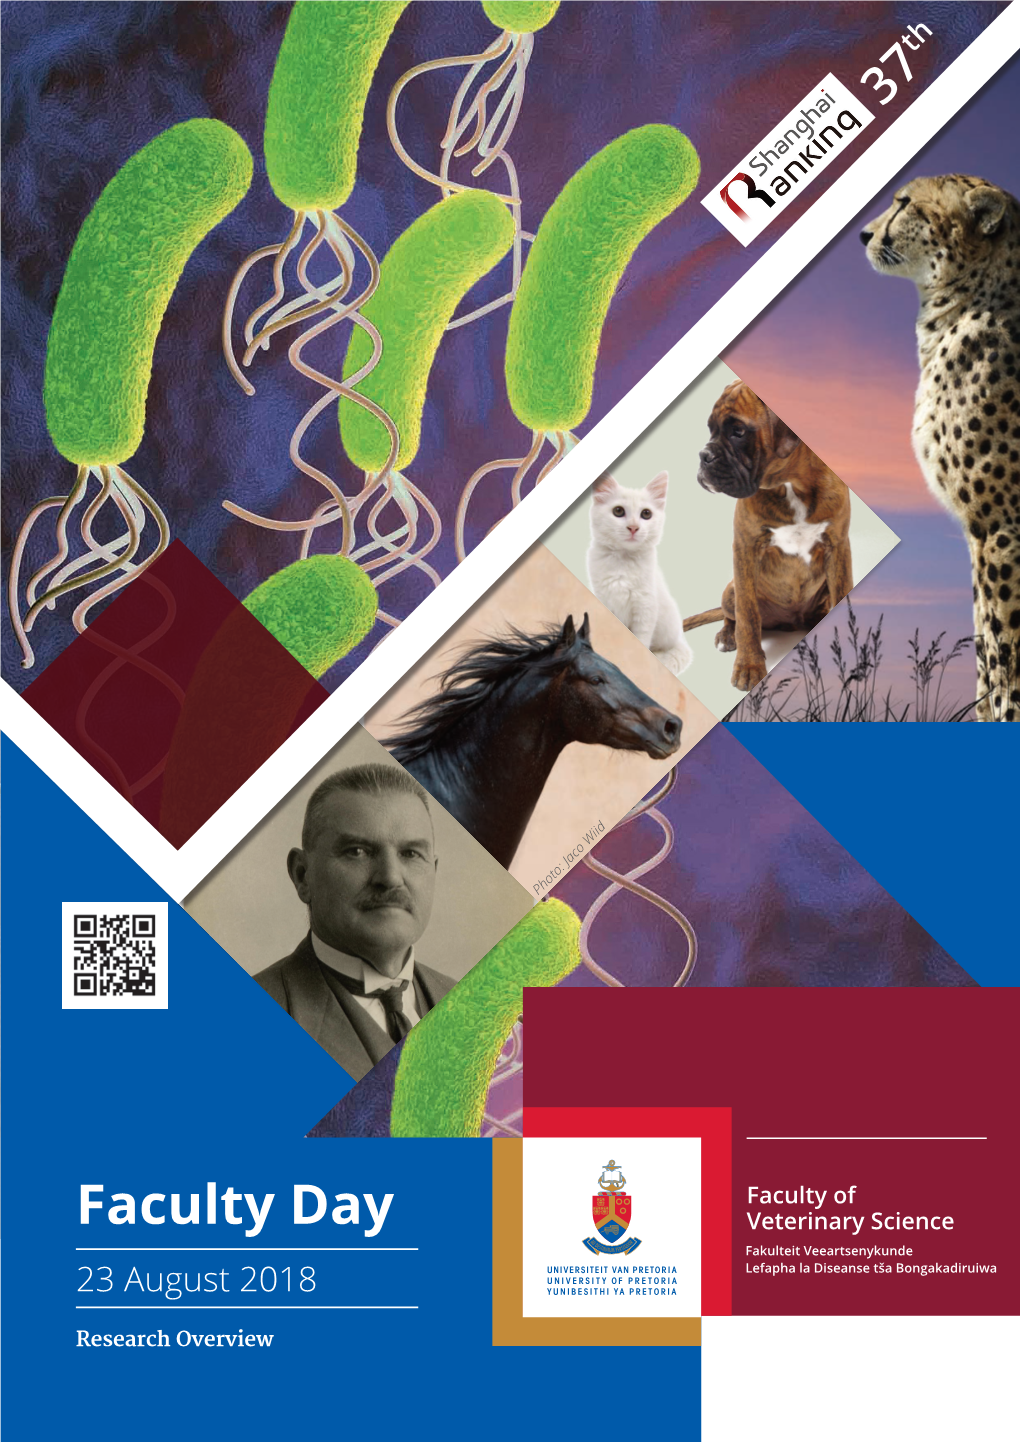 Faculty Day 23 August 2018